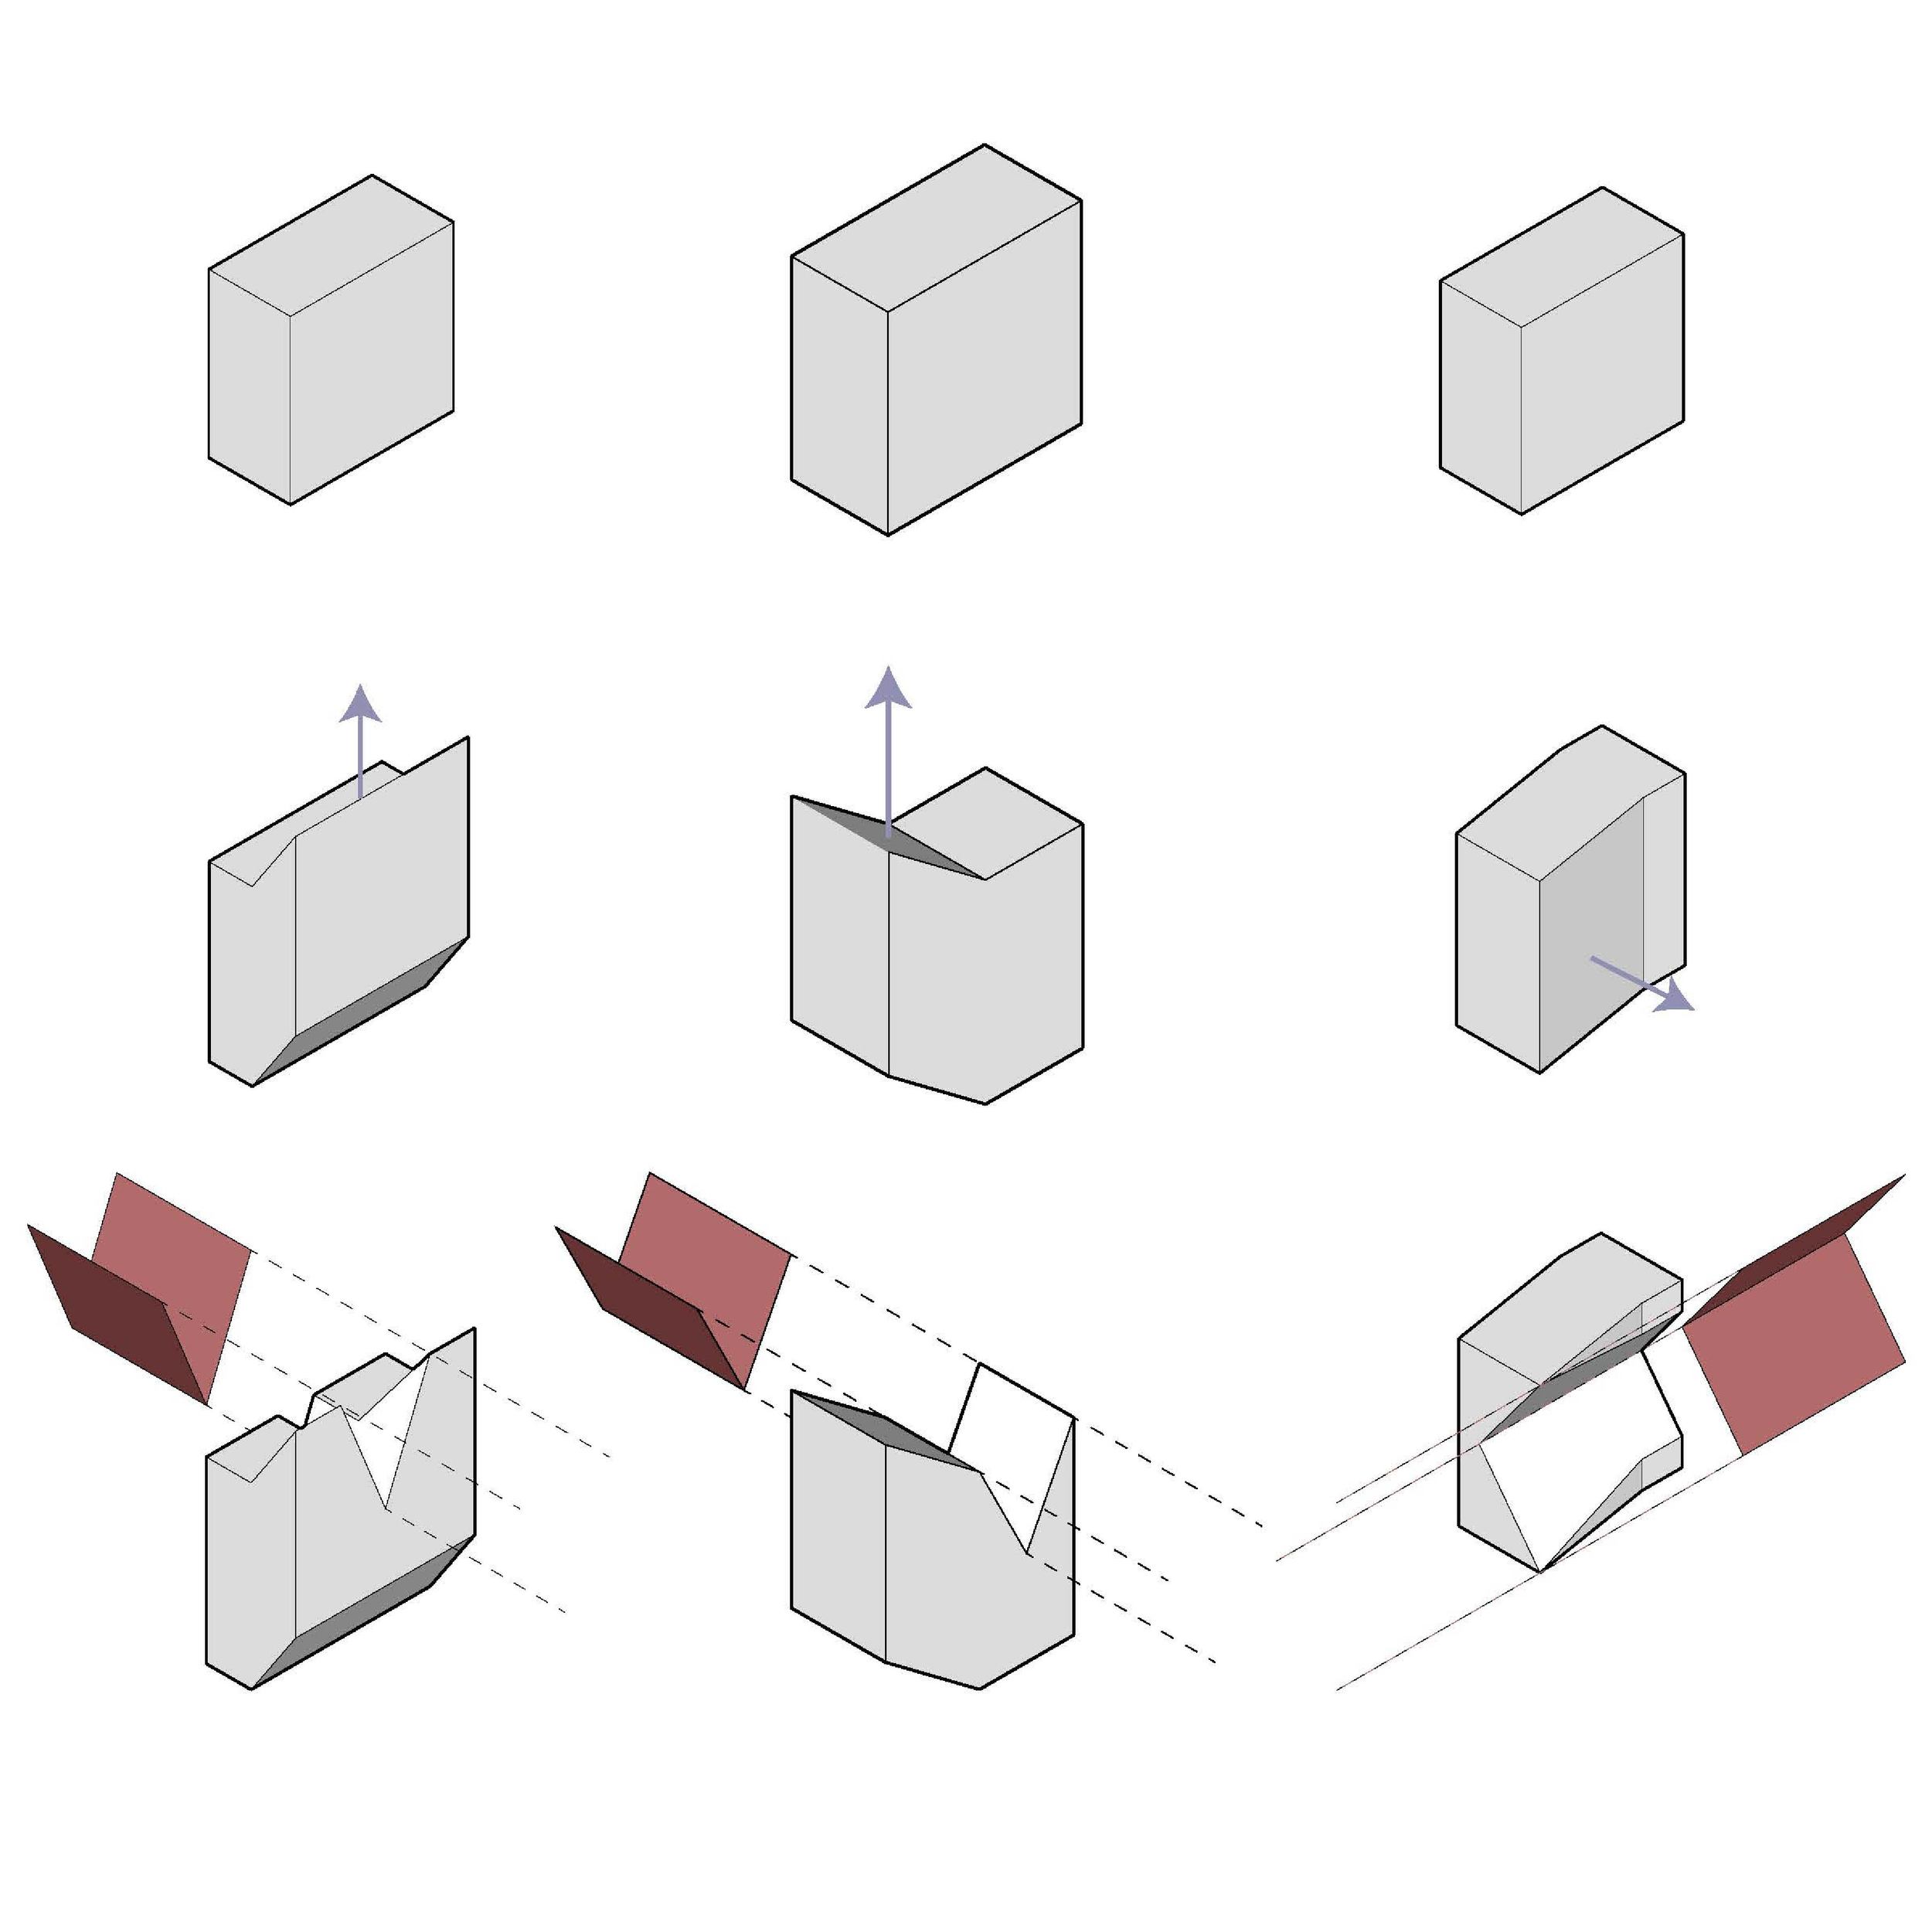 Variations on sequential operations || SketchUp, Illustrator